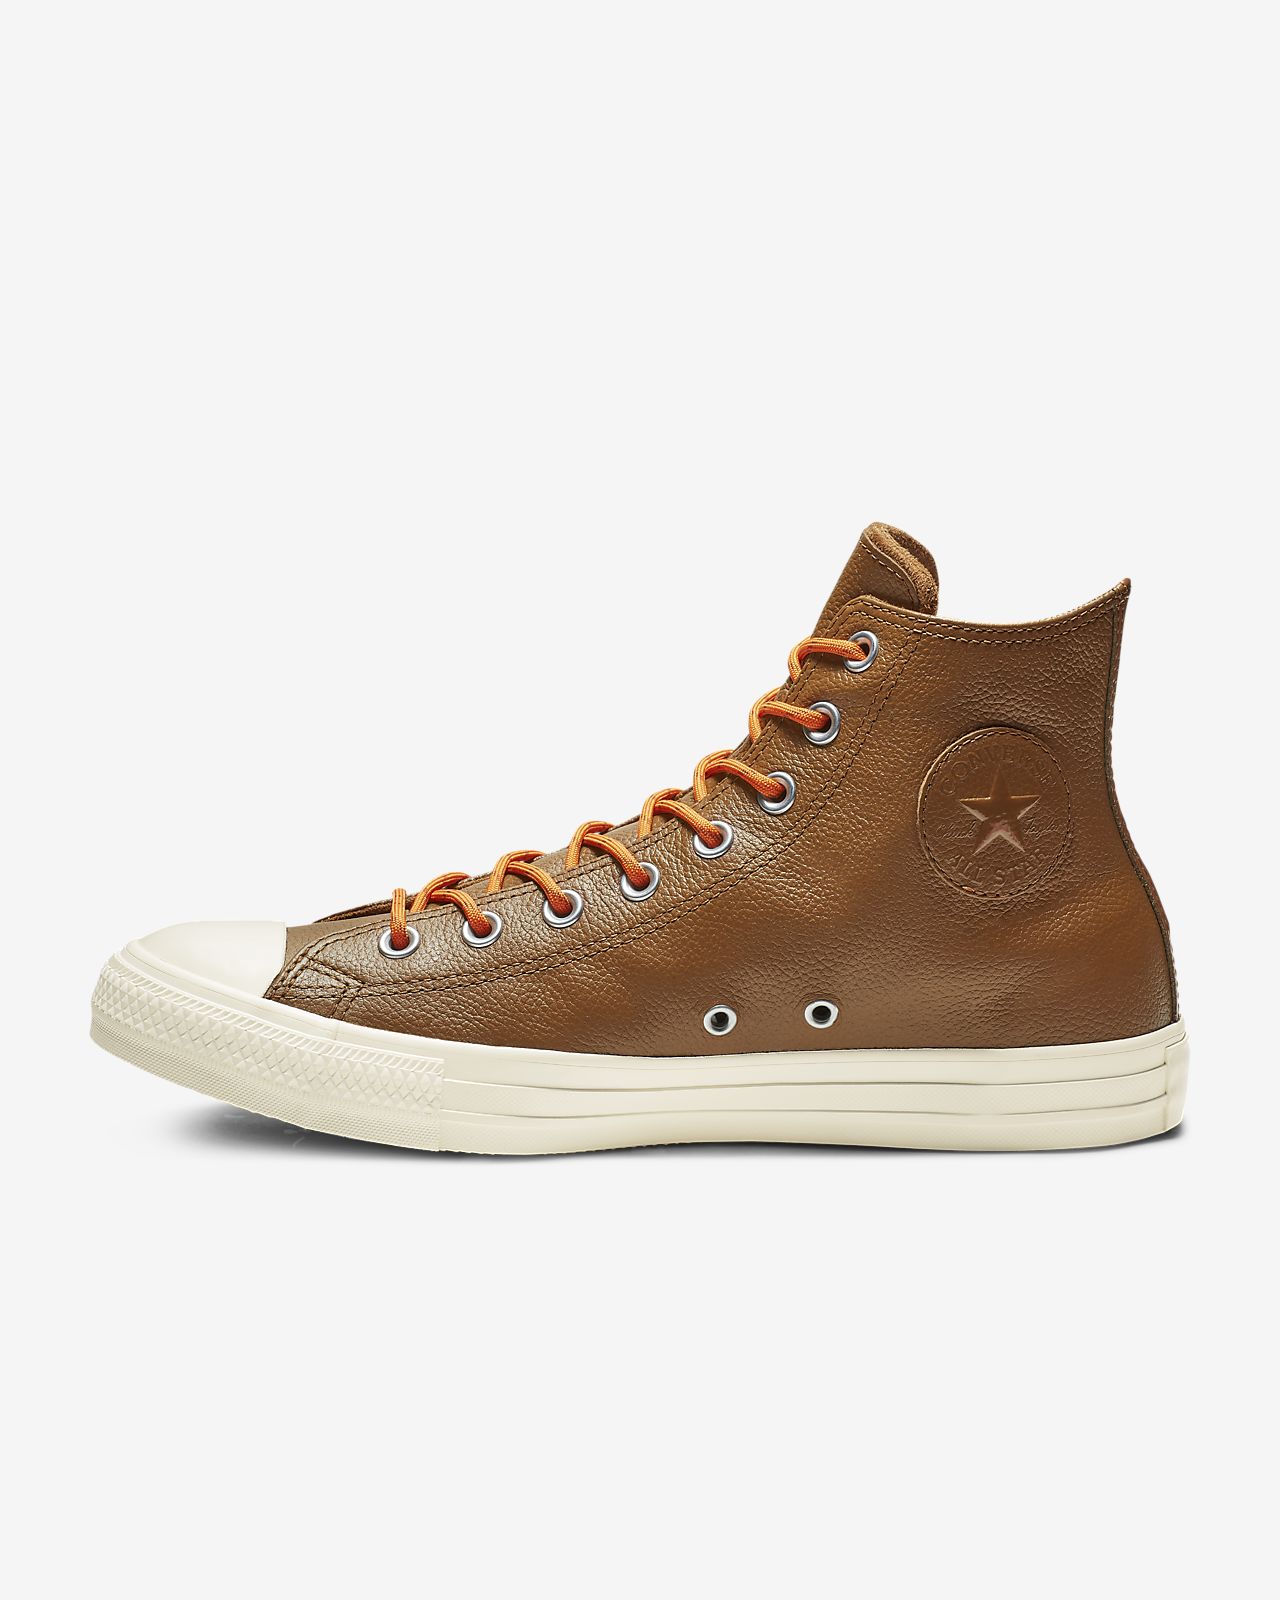 Converse Chuck Taylor All Star Limo Leather High Top Unisex Shoe. Nike.com